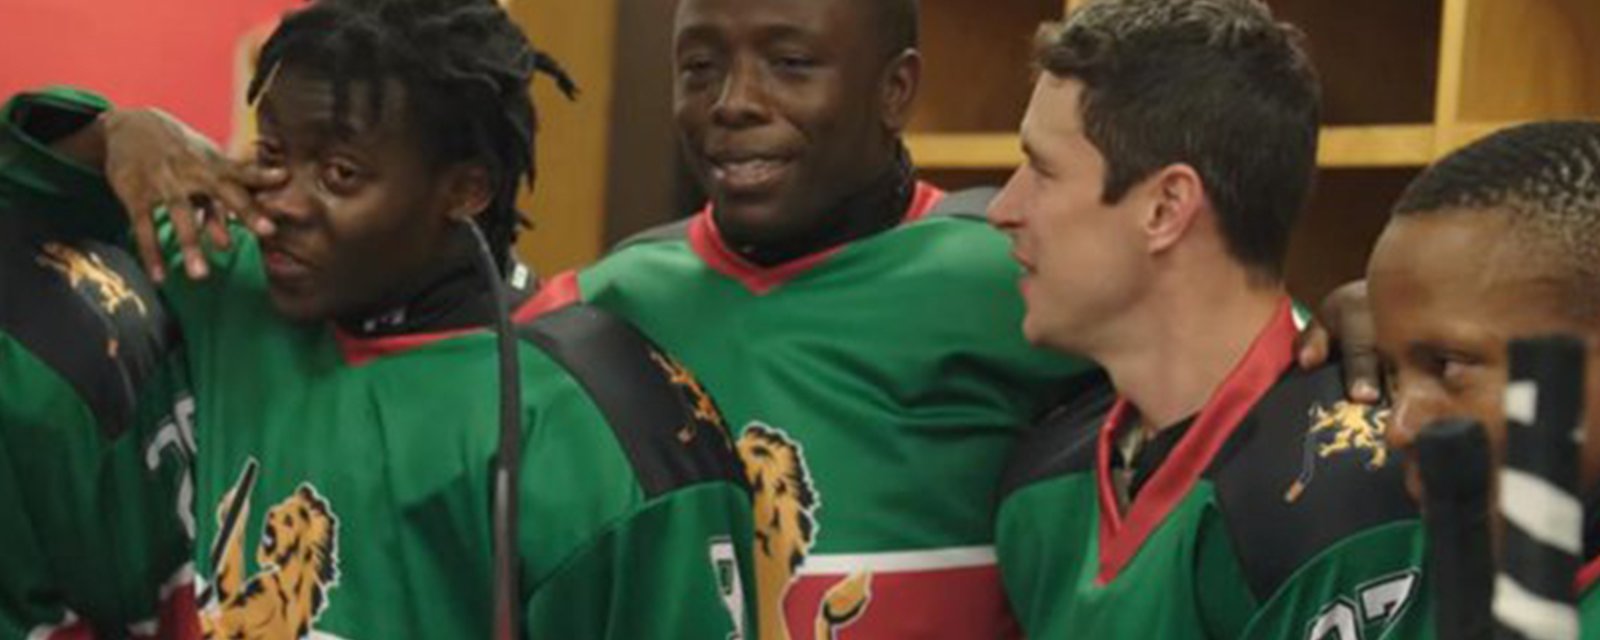 NHL superstars Crosby and MacKinnon give African hockey team a once in a lifetime experience